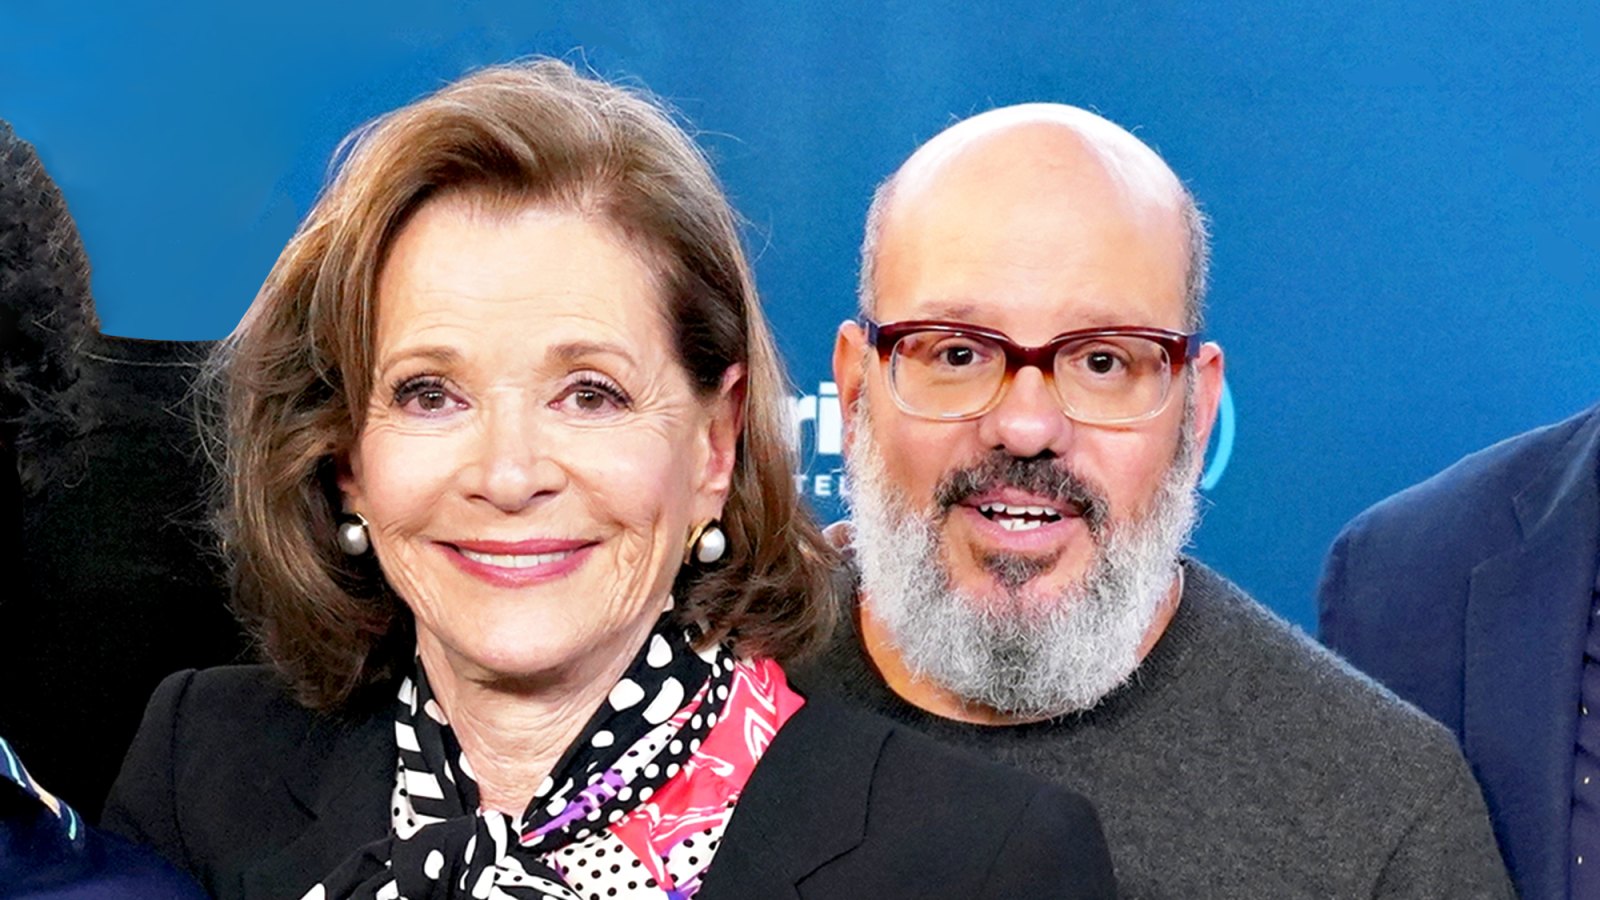 David Cross and Jessica Walter attend the 2018 SiriusXM's Town Hall with the cast of Arrested Development at SiriusXM Studio in New York City.